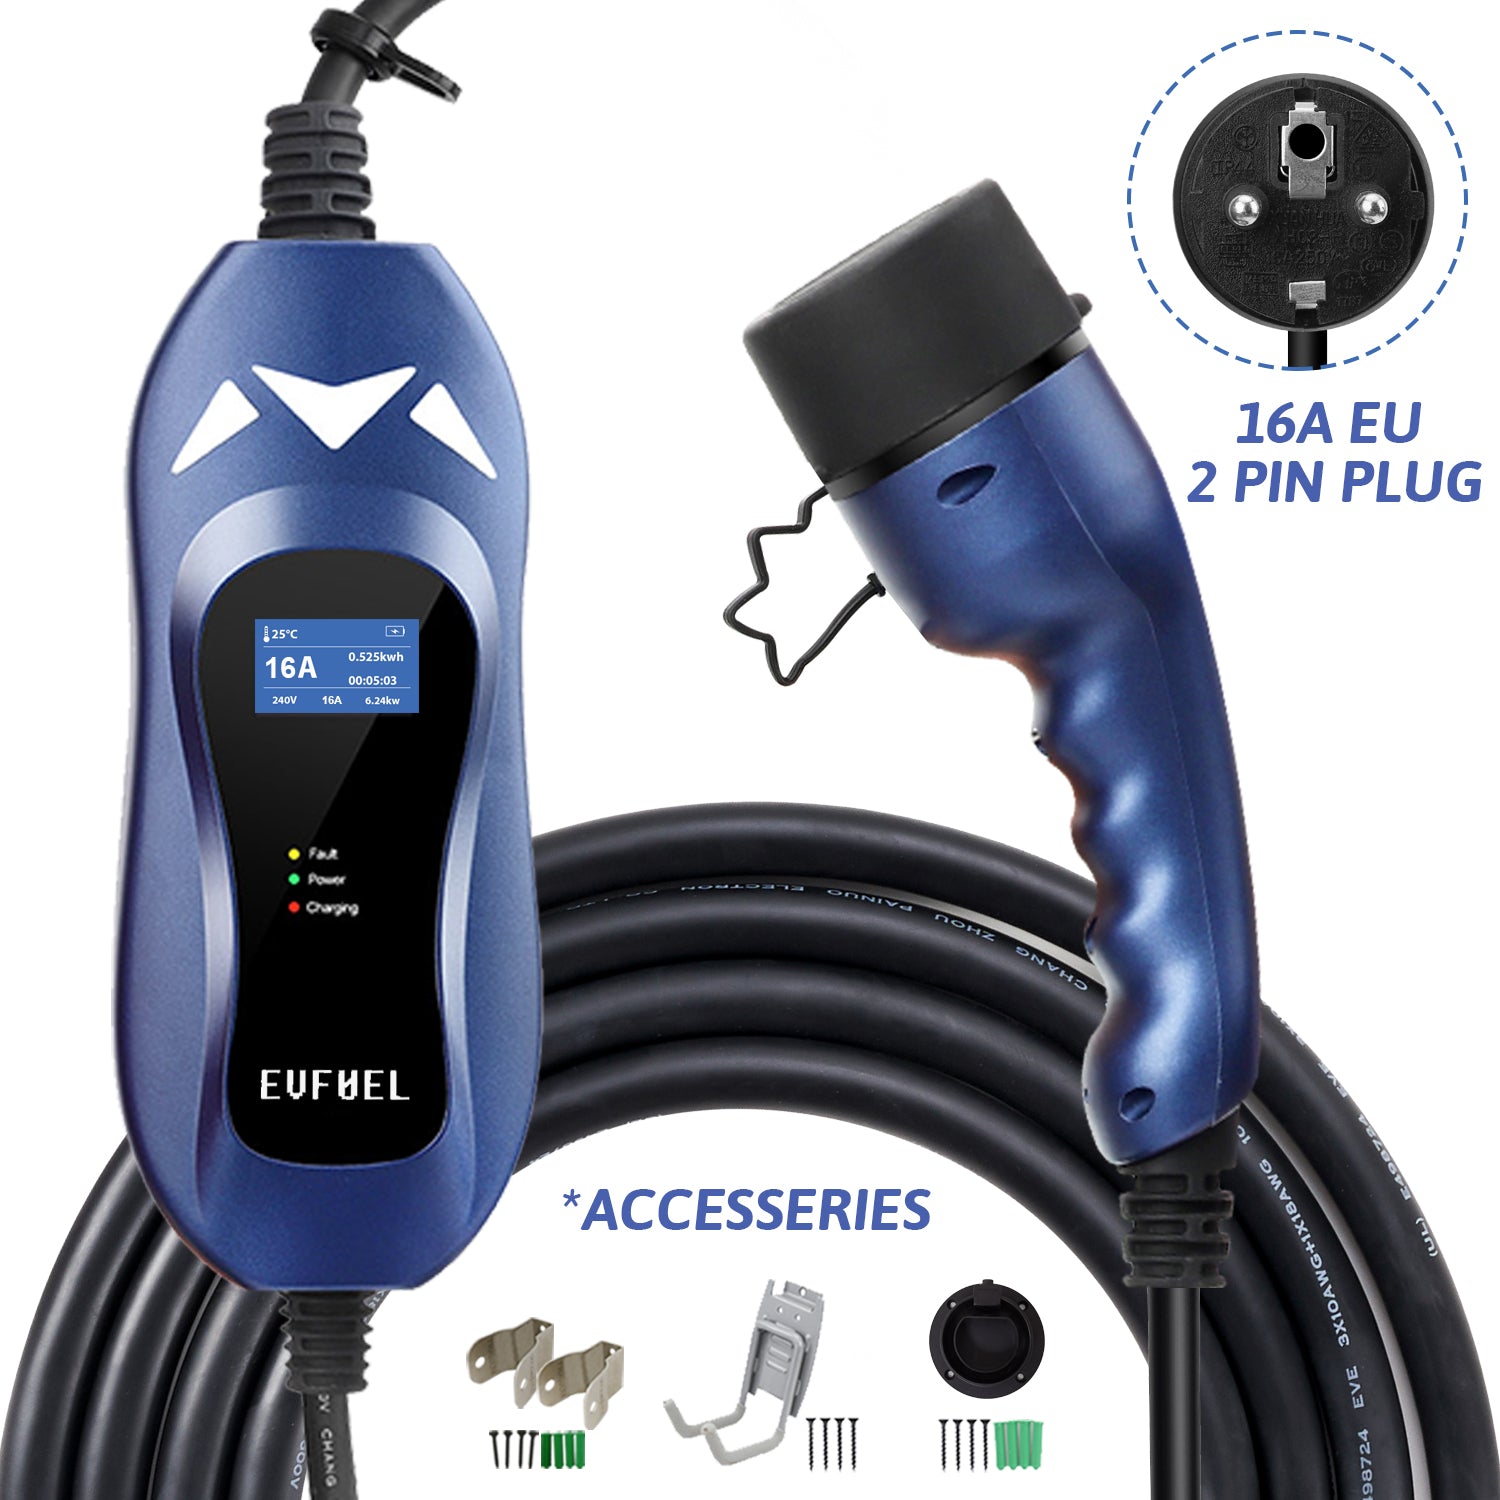 Type 2 EVSE home charger for portable charging . 16A Blue CEE Plug